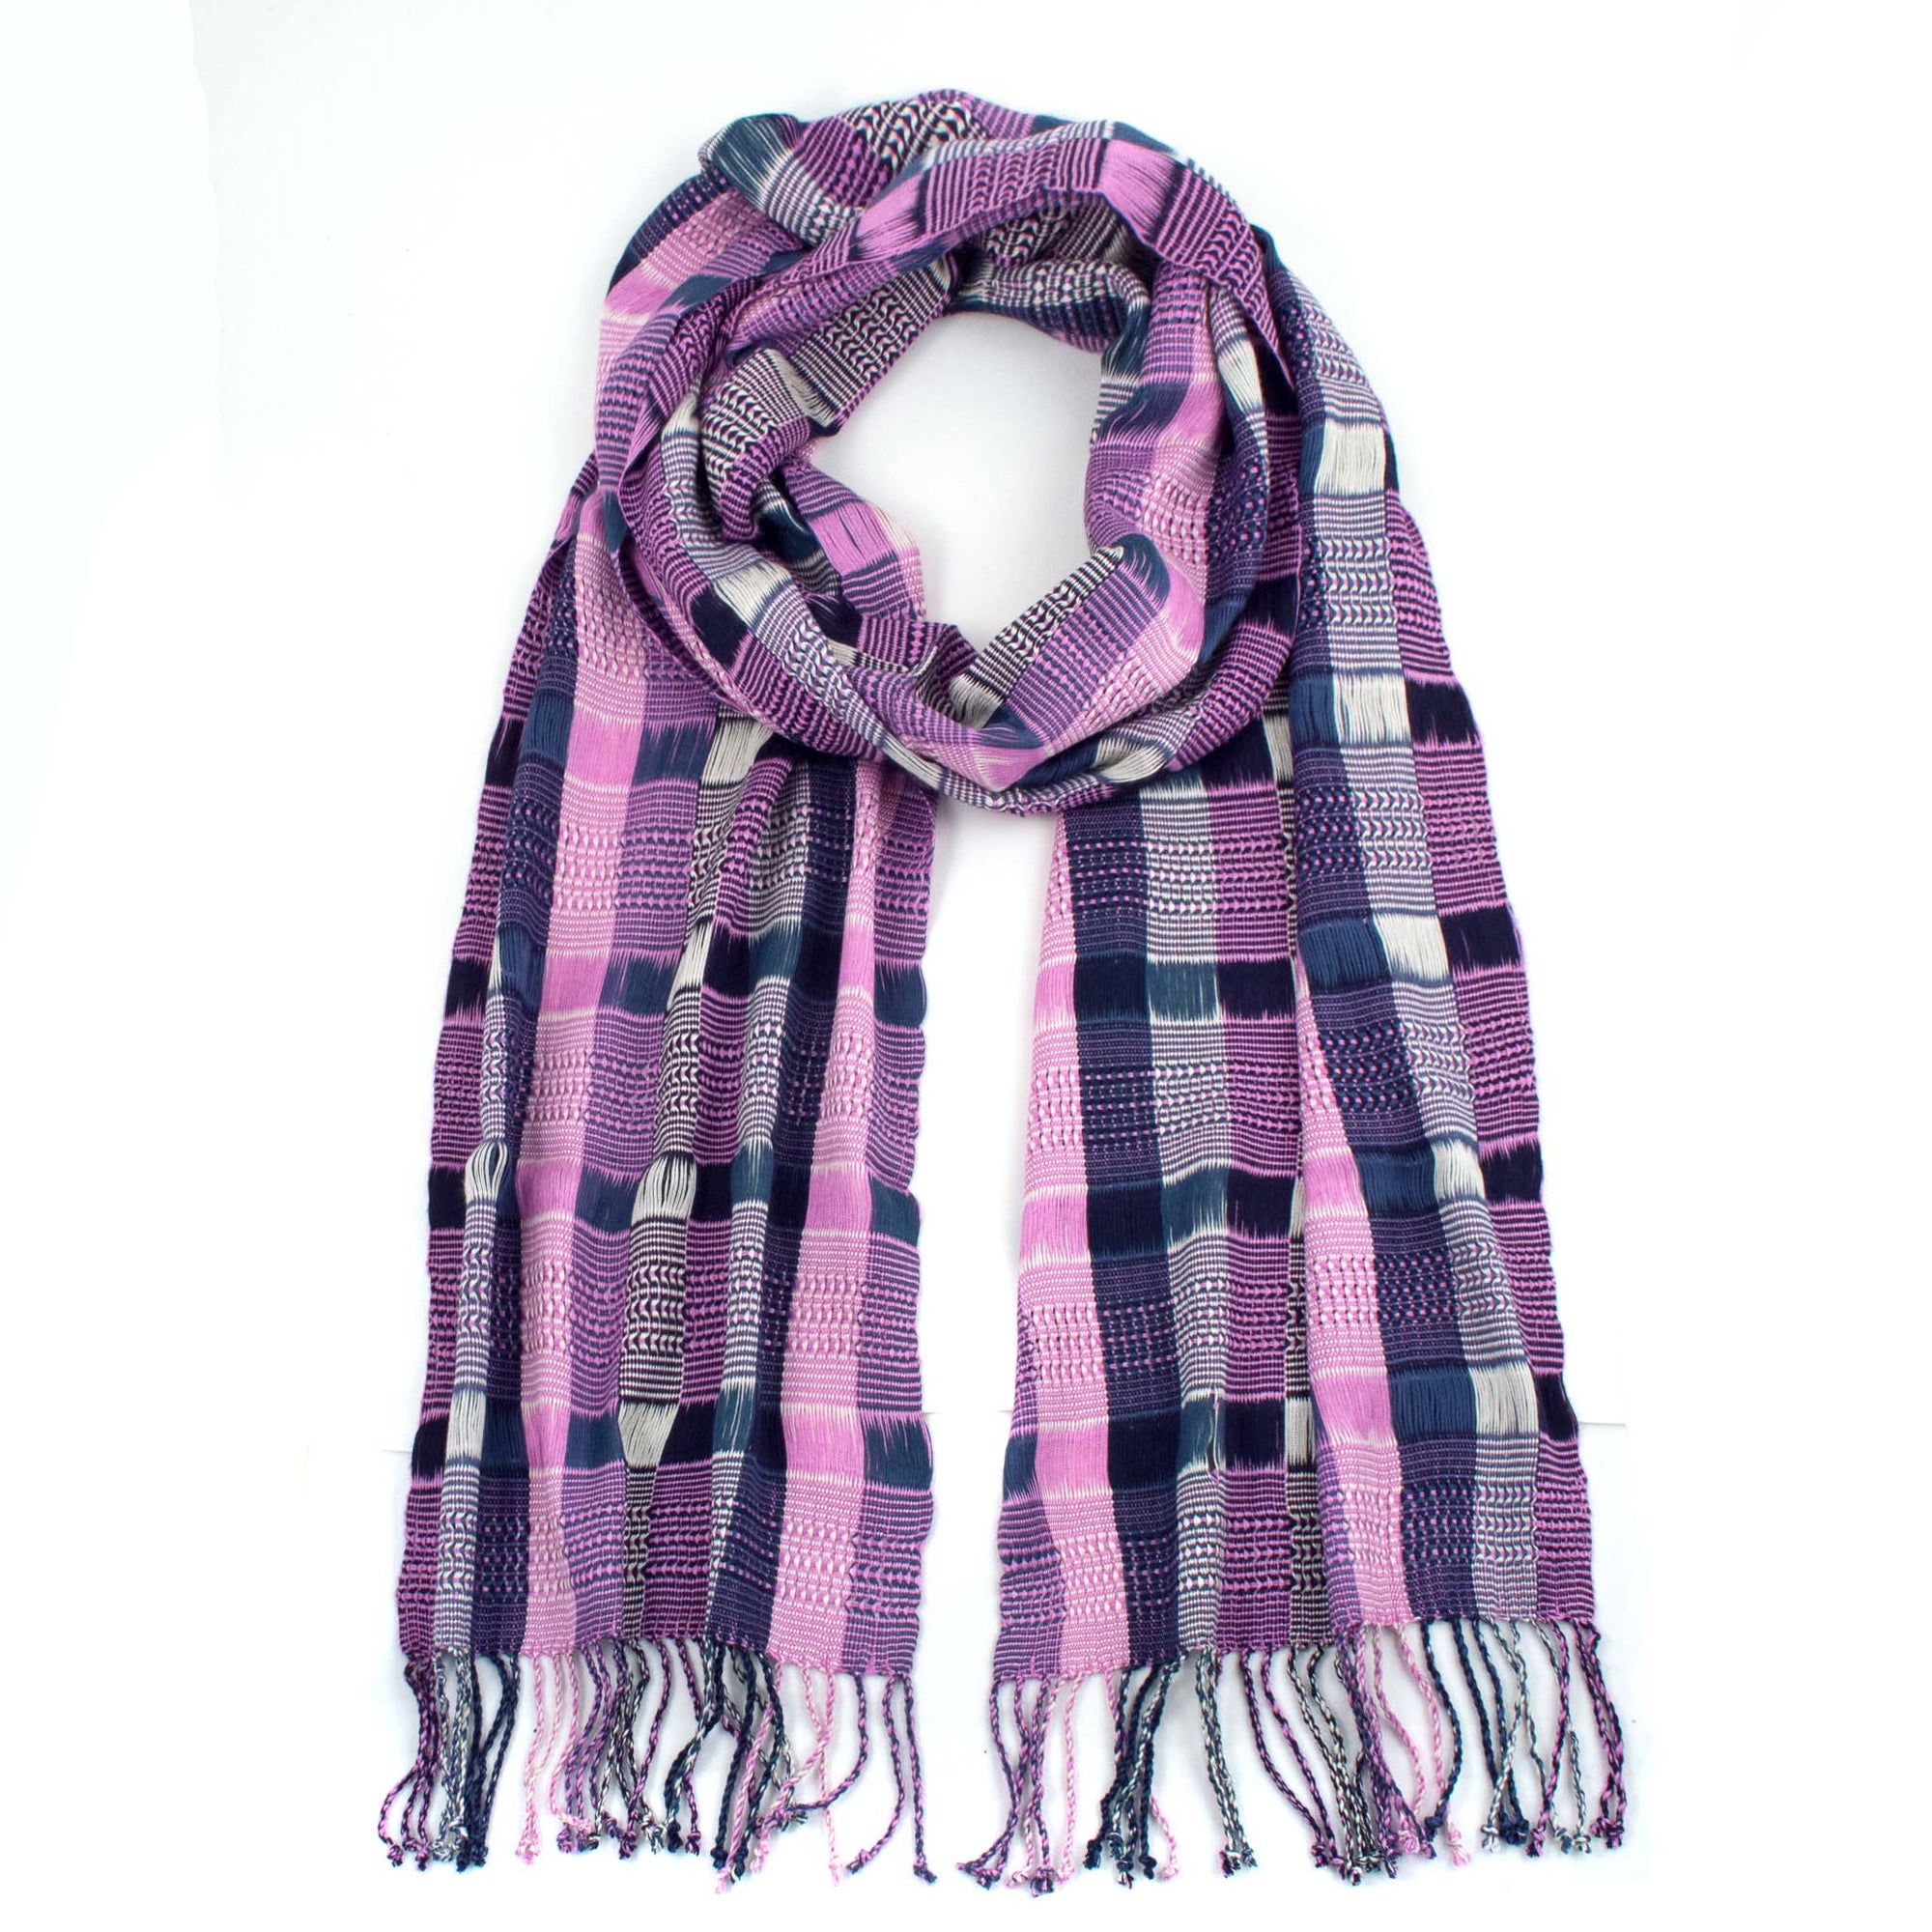 Angelina Scarf in Violet, made from rayon threads in purple and blue tones, with twisted fringe. The scarf is laid flat, wrapped with a circle on white background.